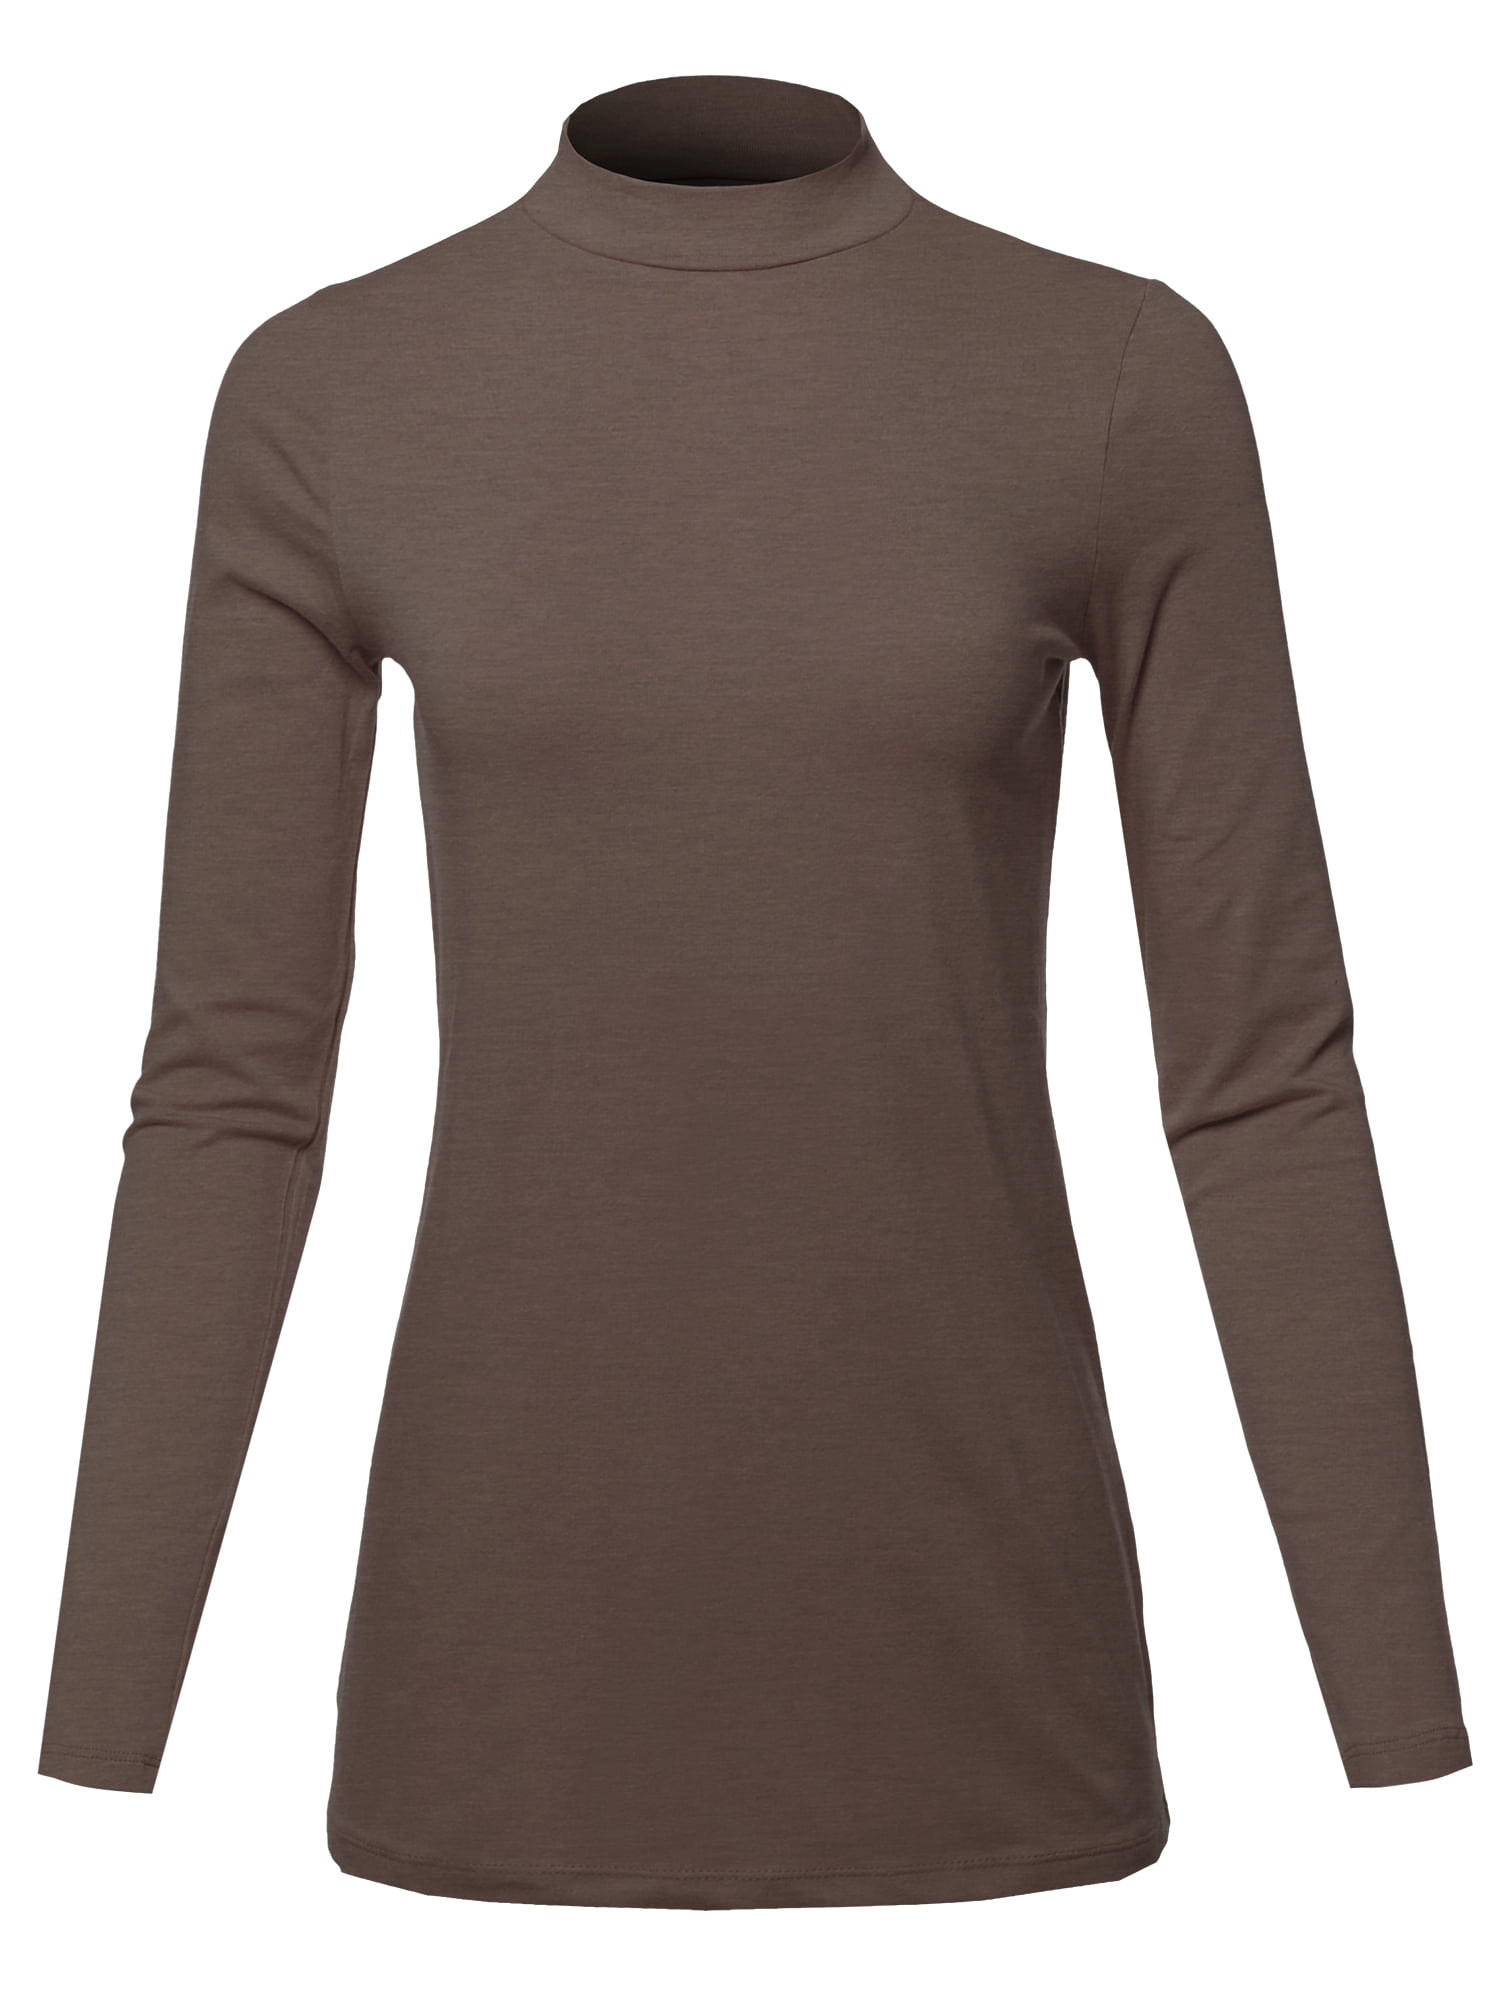 A2y Womens Basic Solid Soft Cotton Long Sleeve Mock Neck Top Shirts Brown S 